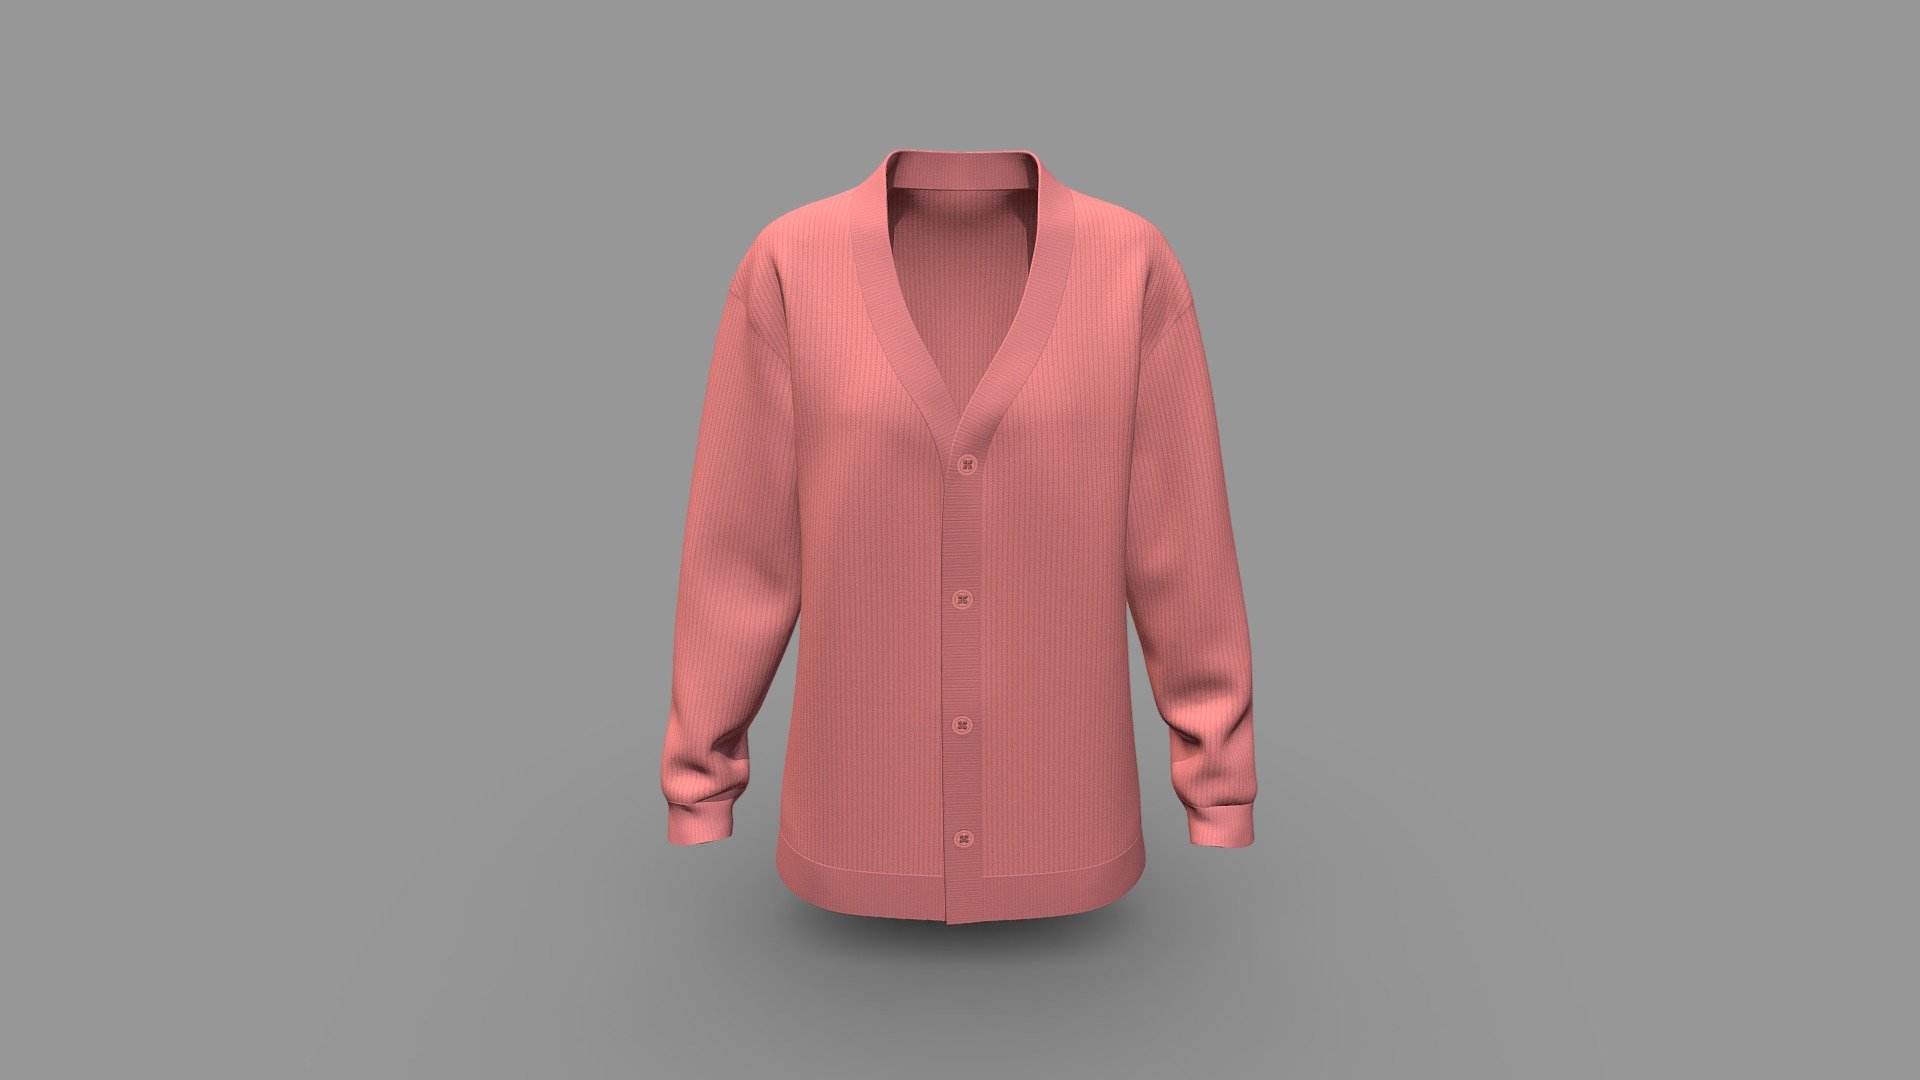 Cloth Title = Regular Loose Fit Unisex Cardigan Design

SKU = DG100051

Product Type = Cardigan

Cloth Length = Regular

Body Fit = Loose Fit

Occasion = Outerwear

Sleeve Style = Drop Shoulder


Our Services:

3D Apparel Design.

OBJ,FBX,GLTF Making with High/Low Poly.

Fabric Digitalization.

Mockup making.

3D Teck Pack.

Pattern Making.

2D Illustration.

Cloth Animation and 360 Spin Video.

Contact us:- 

Email: info@digitalfashionwear.com 

Website: https://digitalfashionwear.com 

WhatsApp No: +8801759350445 


We designed all the types of cloth specially focused on product visualization, e-commerce, fitting, and production. 

We will design: 

T-shirts 

Polo shirts 

Hoodies 

Sweatshirt 

Jackets 

Shirts 

TankTops 

Trousers 

Bras 

Underwear 

Blazer 

Aprons 

Leggings 

and All Fashion items. 





Our goal is to make sure what we provide you, meets your demand 3d model